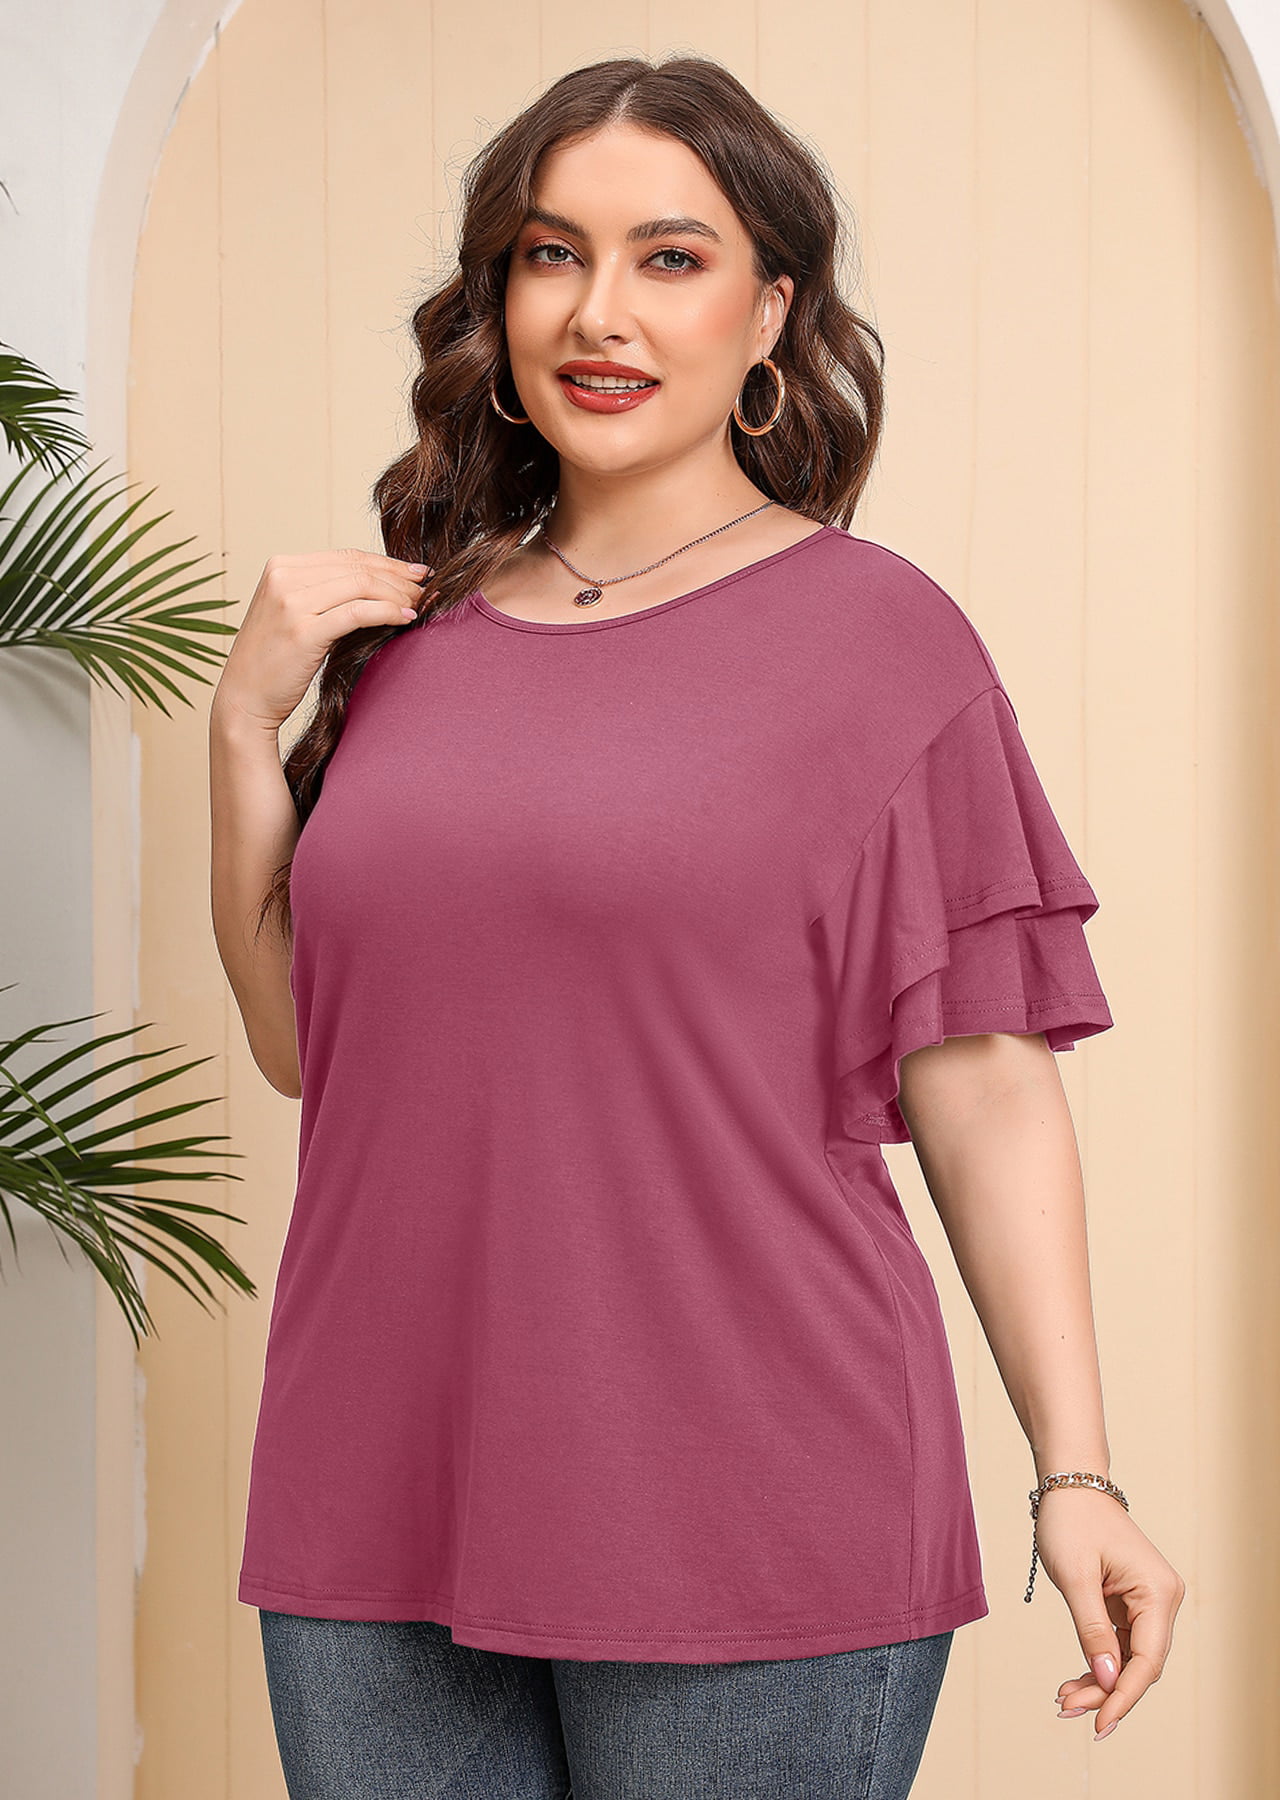 SHOWMALL Plus Size Tops for Women Short Sleeve Pink Leopard Brown 4X Tunic  Shirt Summer Clothing Loose Fitting Clothes